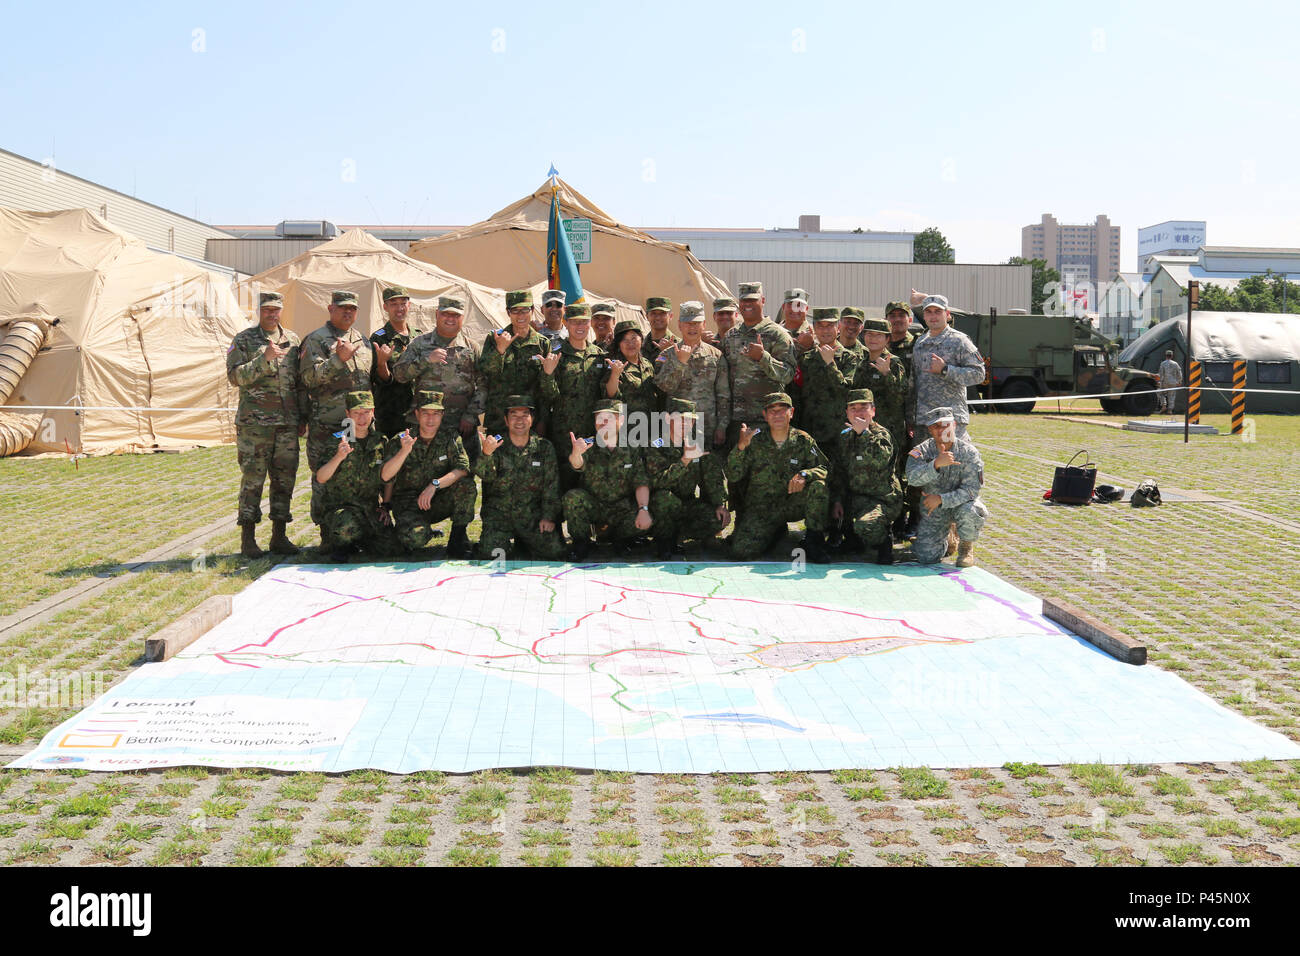 U.S. and Japan Ground Self-Defense Force (JGSDF) service members pose for a photo behind a 30 by 30 feet map outside Sagamihara Depot Mission Training Complex during exercise Imua Dawn 2016, Sagamihara, Japan, June 18, 2016.  Imua Dawn 2016 provides opportunities for U.S. and Japanese forces to come together and train for potential real world events, better preparing them in supporting regional populations in all Humanitarian Assistance and Disaster Relief (HADR) and Noncombatant Evacuation Operations (NEO). Training together, the U.S. and Japan Ground Self-Defense Force can further develop ta Stock Photo